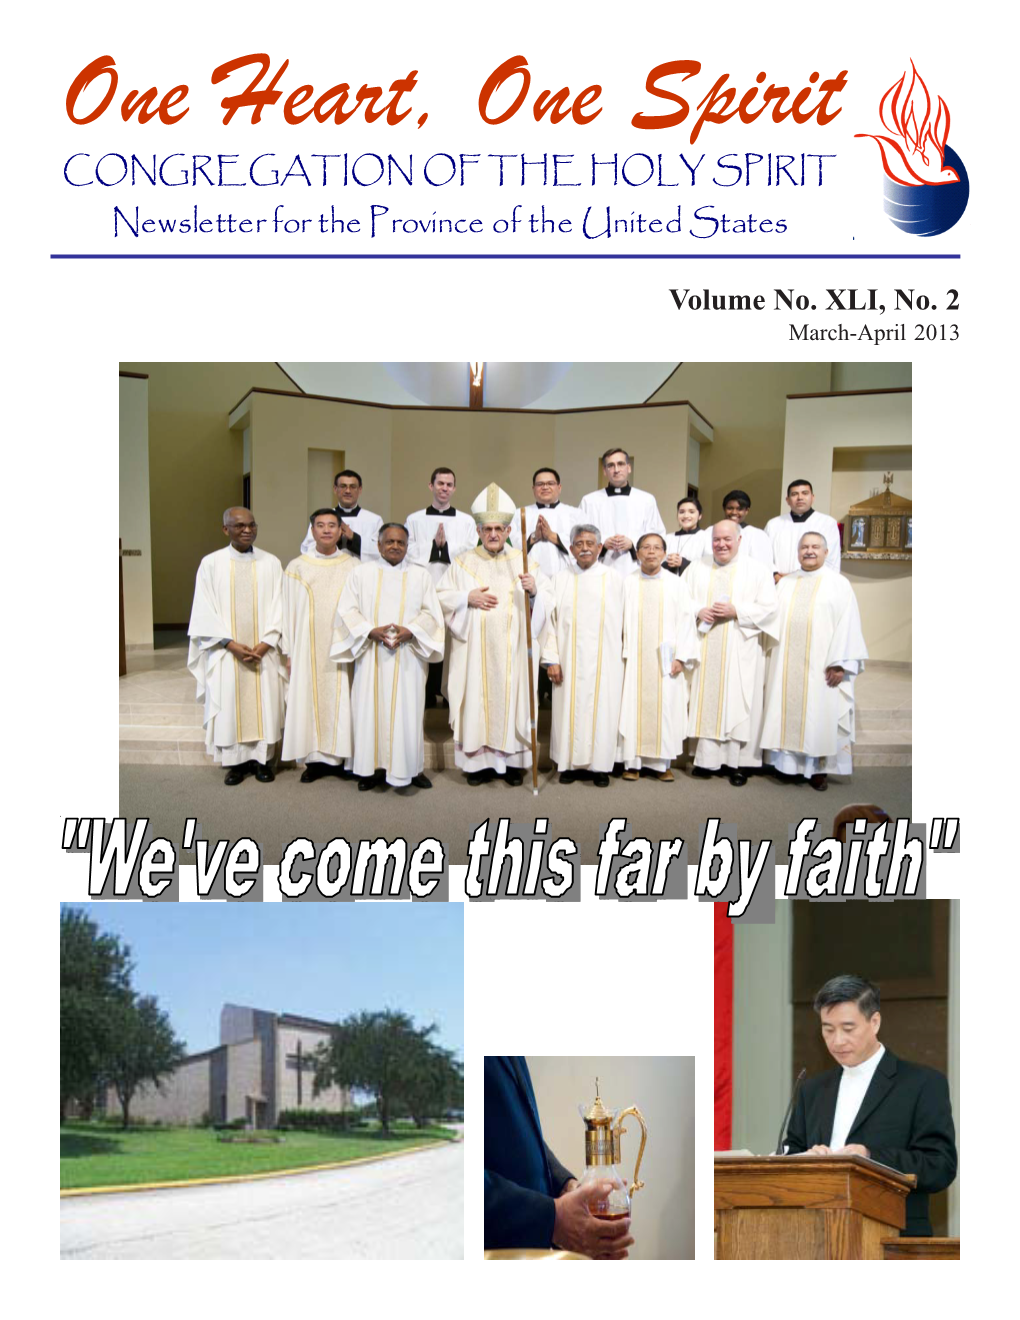 One Heart, One Spirit CONGREGATION of the HOLY SPIRIT Newsletter for the Province of the United States